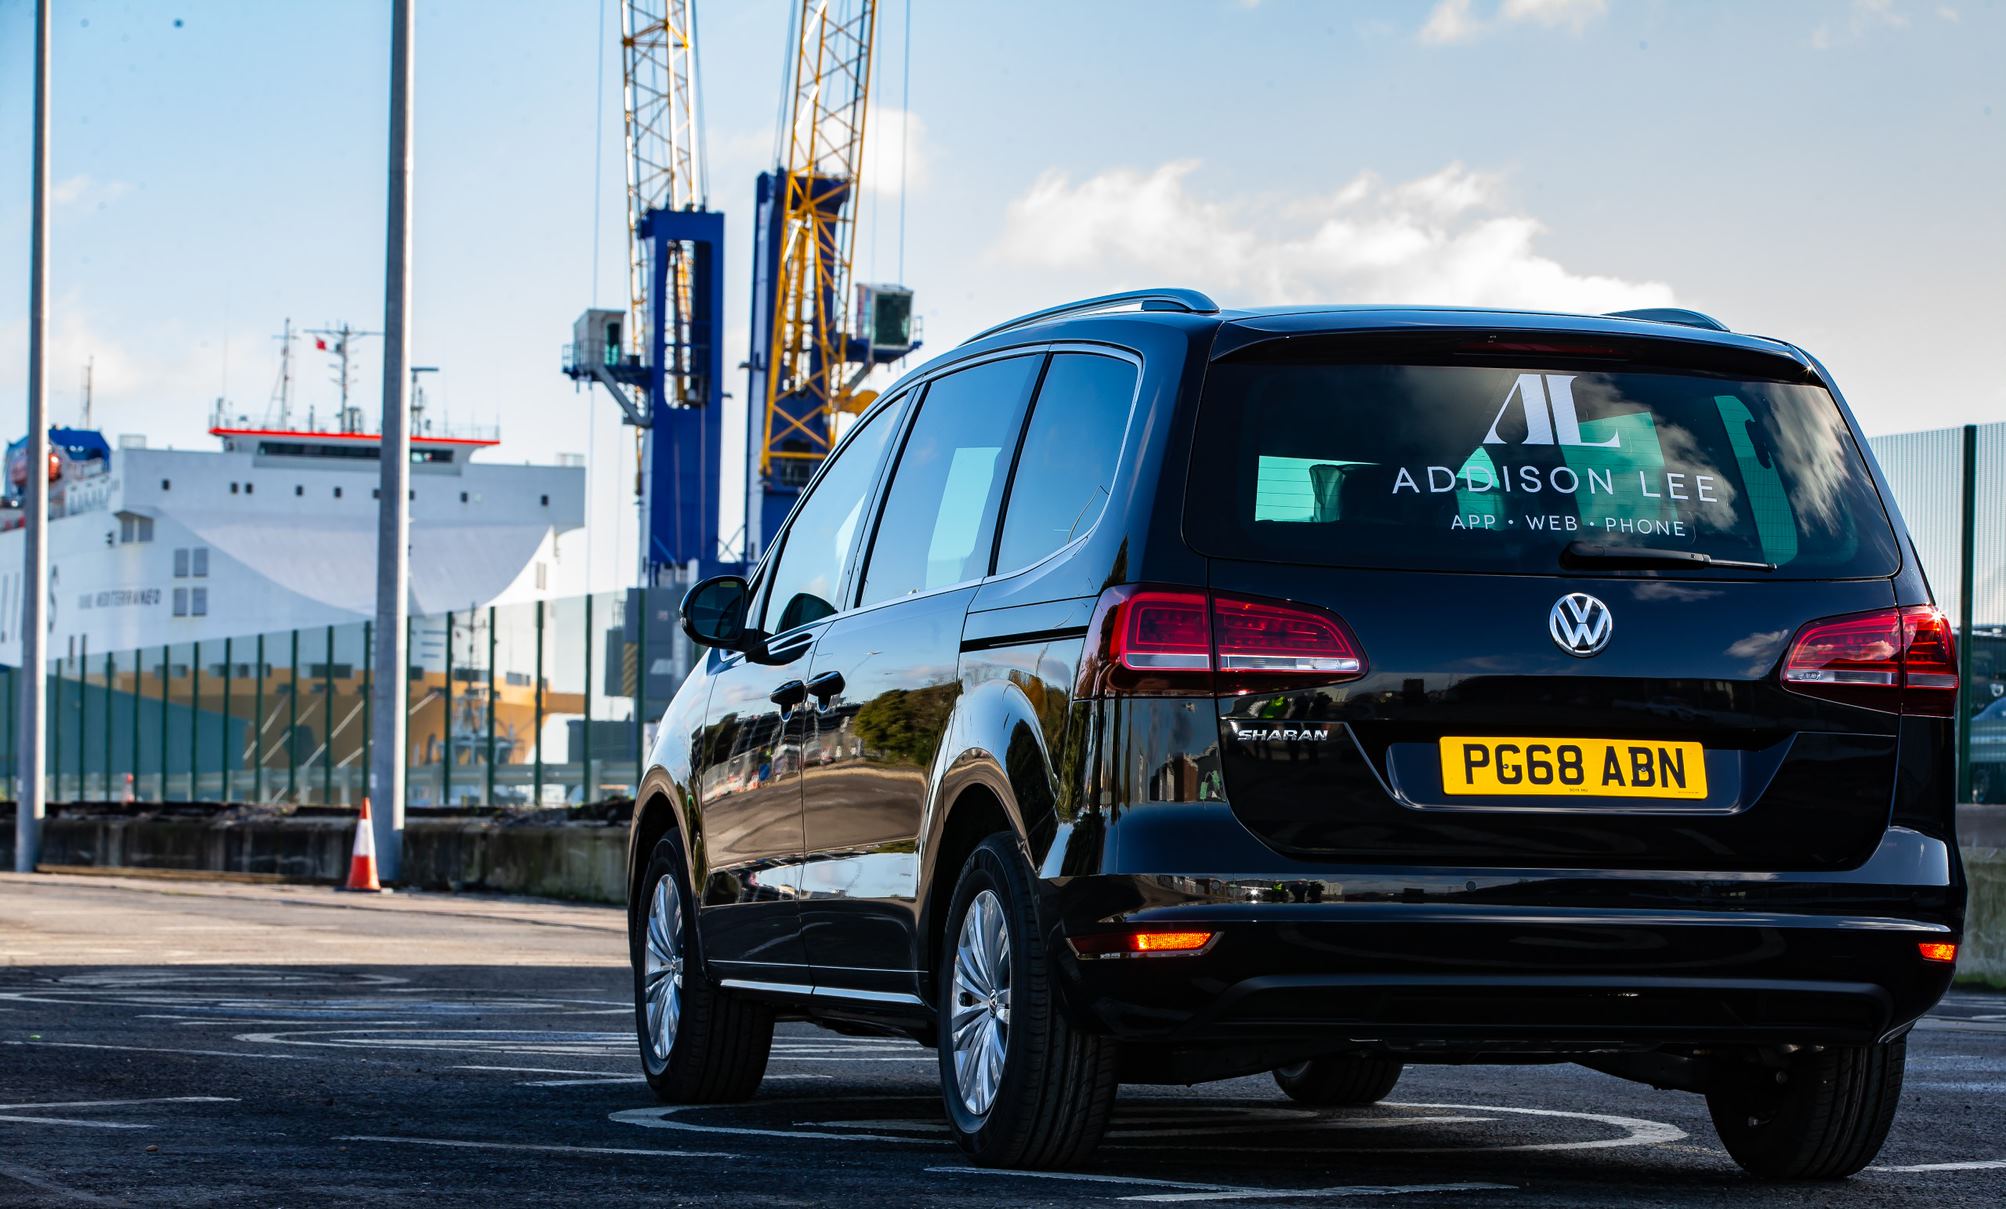 ADDISON LEE GROUP INVESTS IN 1,200 NEW VOLKSWAGEN VEHICLES TO CREATE A  ULEZ-COMPLIANT FLEET FOR LONDON | Addison Lee